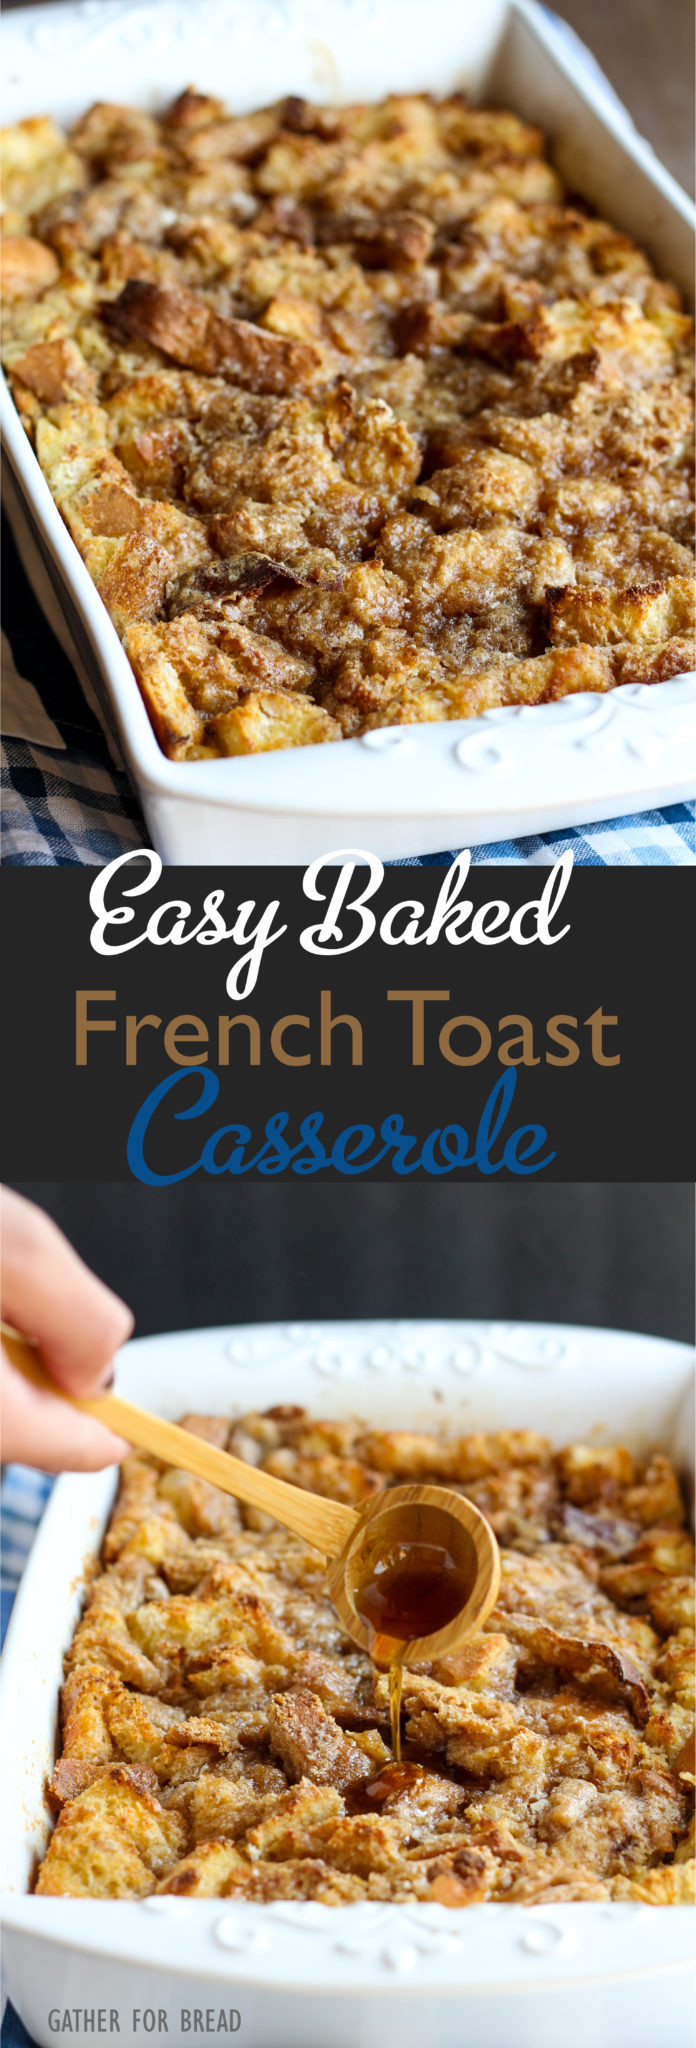 Baked French Toast Casserole
 Easy Baked French Toast Casserole